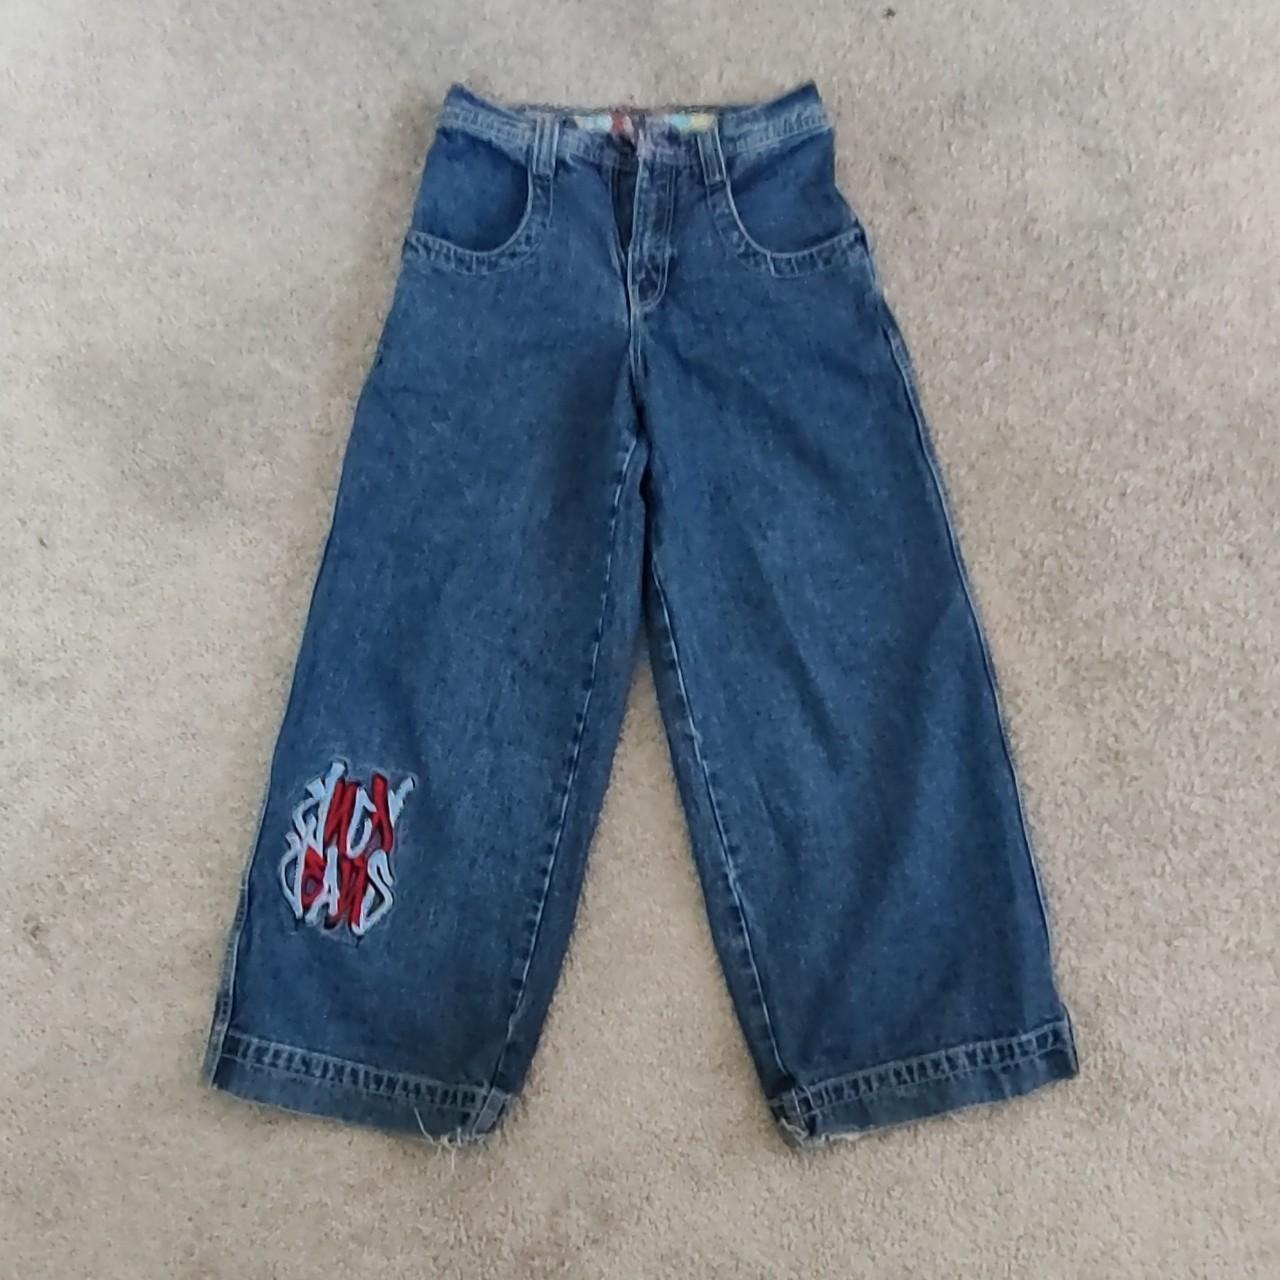 Jnco rollin 26 🍎 These are worn and washed. Have... - Depop